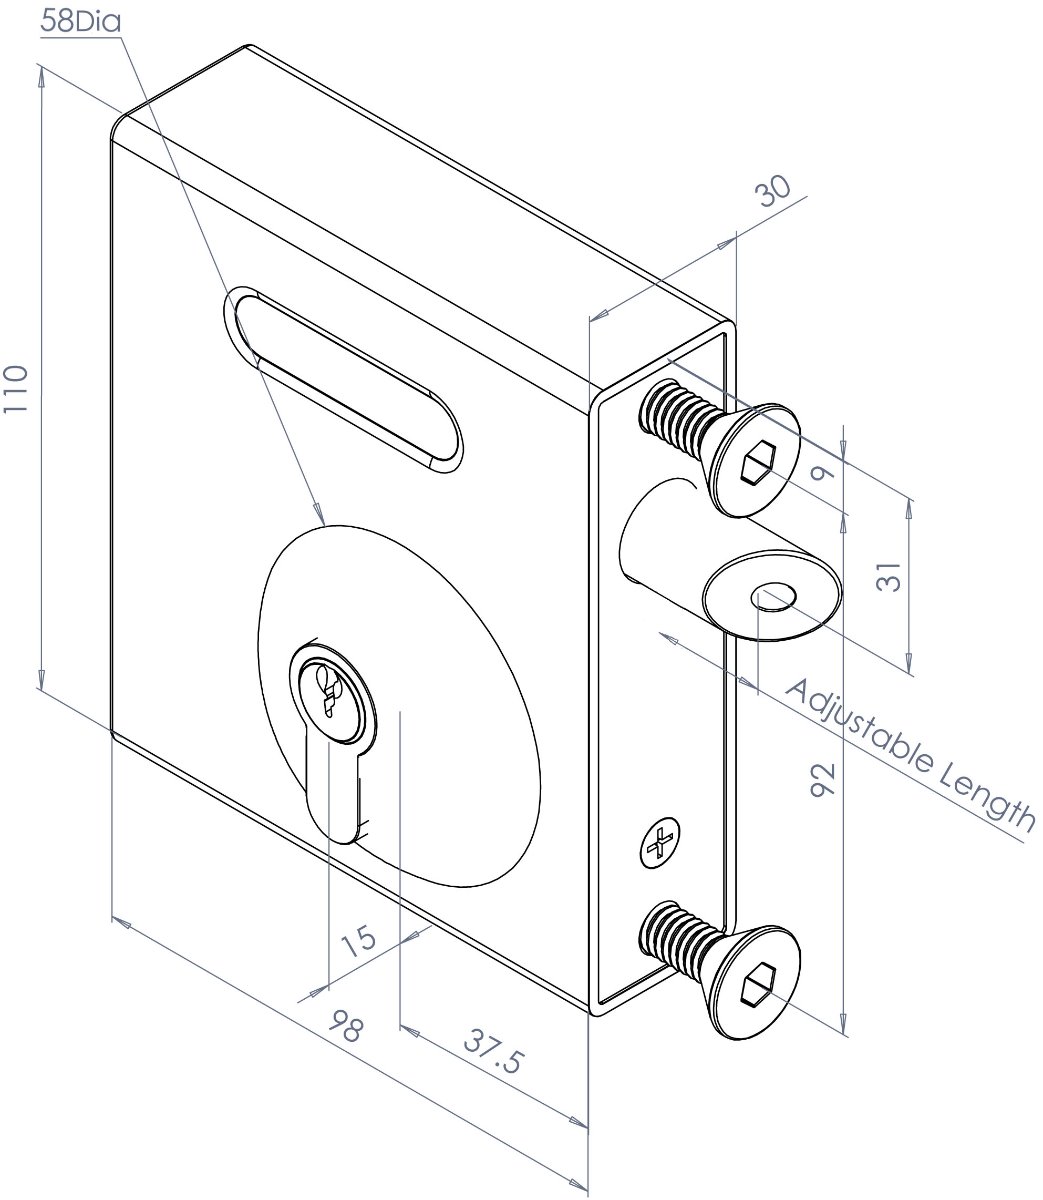 Gatemaster Bolt on Gate Deadlocking Latch - Suits 40-60mm Box Sections